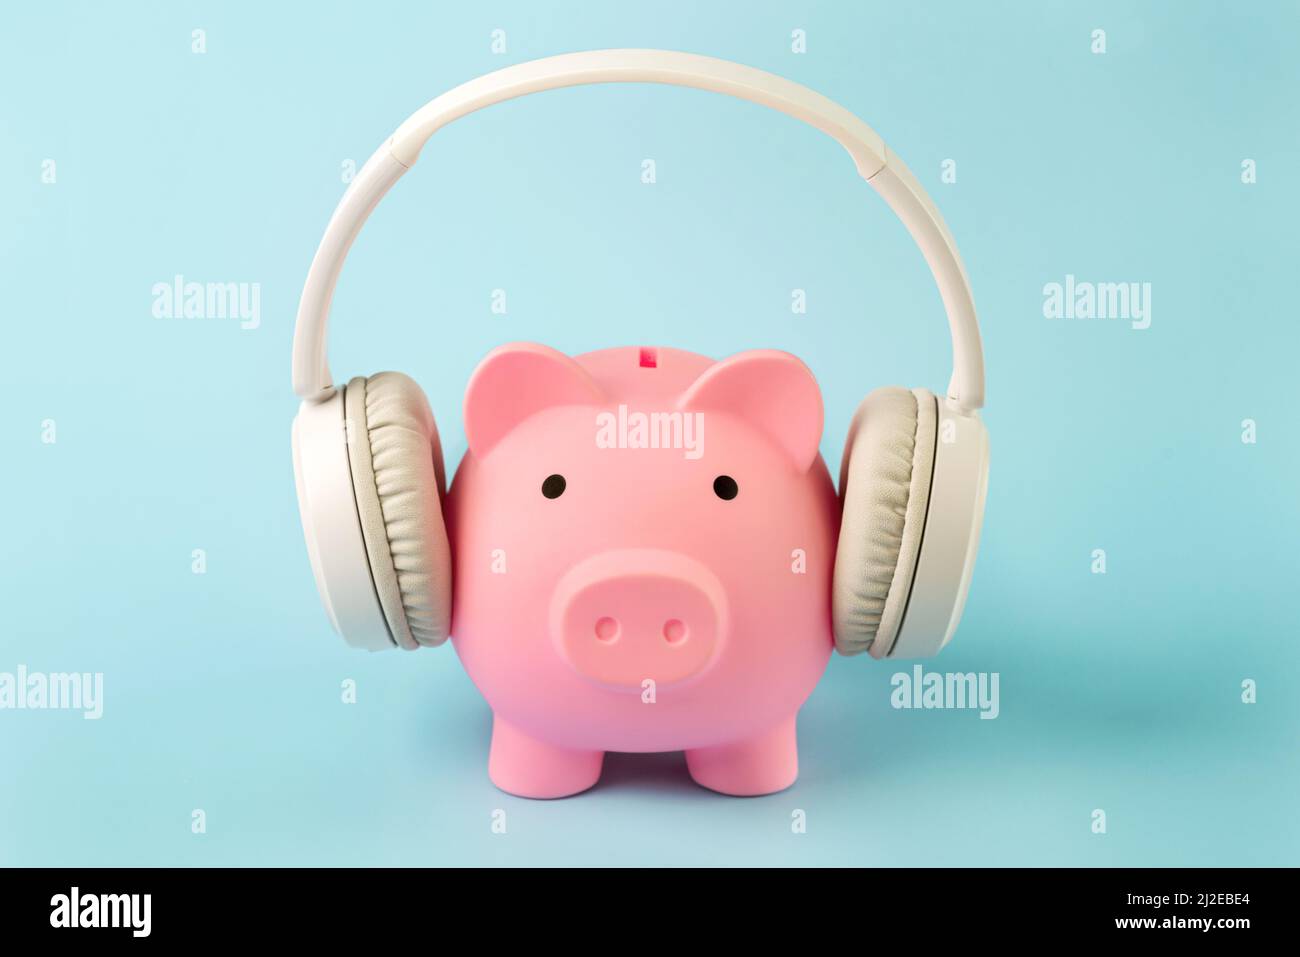 Pink piggy money bank with white wireless headphones over blue background Stock Photo